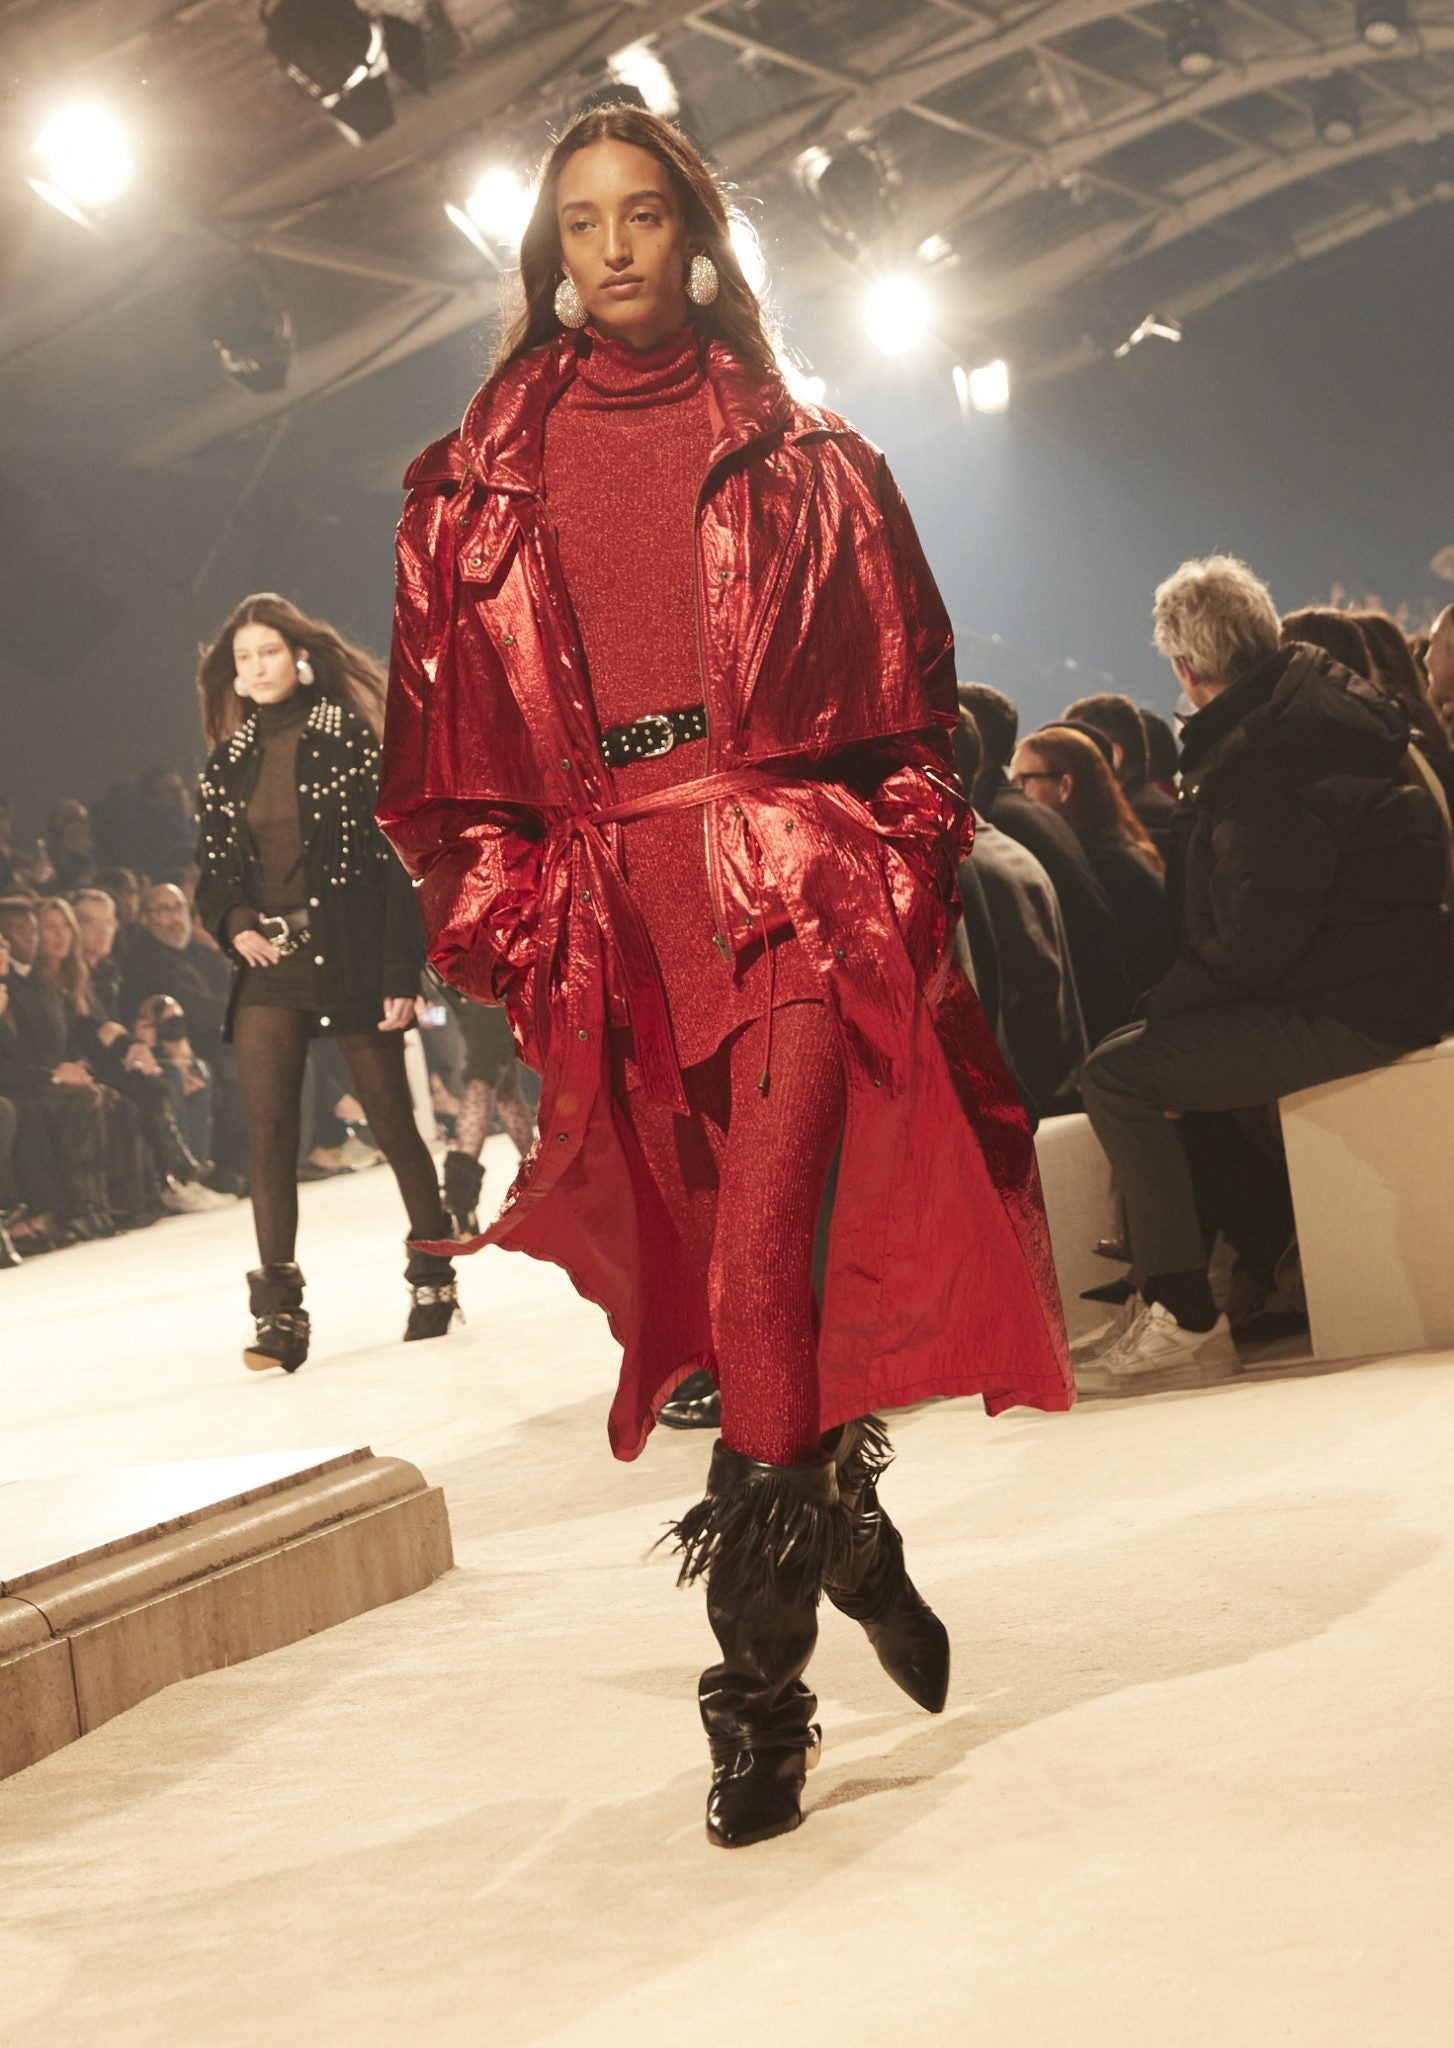 Female model on catwalk wearing an iridescent red trench, a red turtle-neck tunic and tights, studded black belt and black fringed boots.